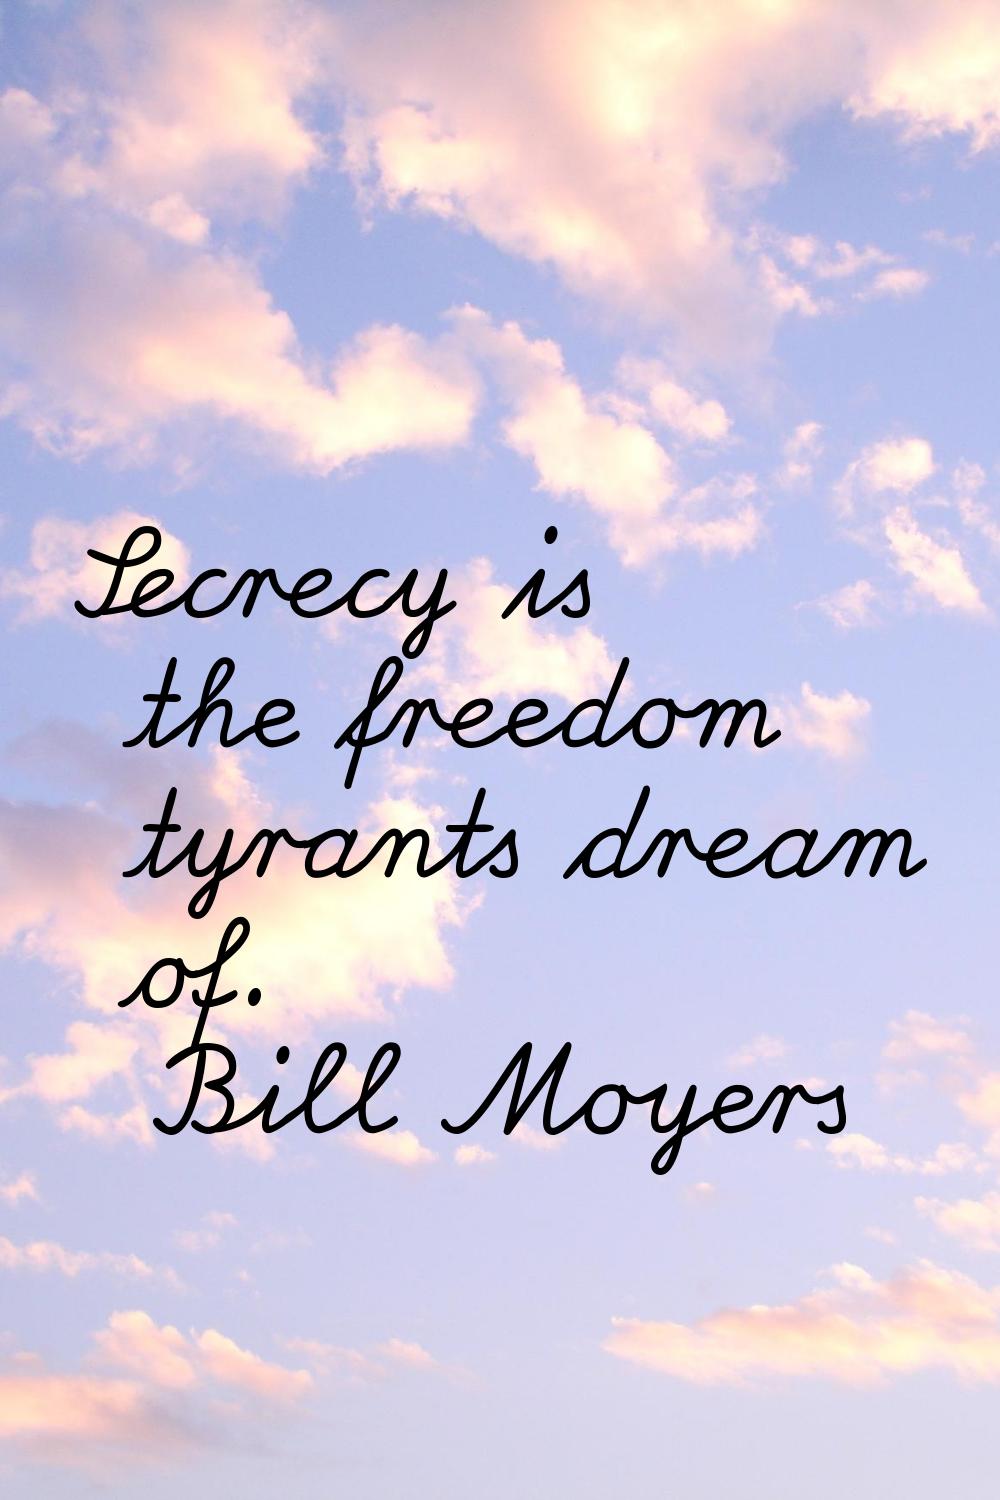 Secrecy is the freedom tyrants dream of.